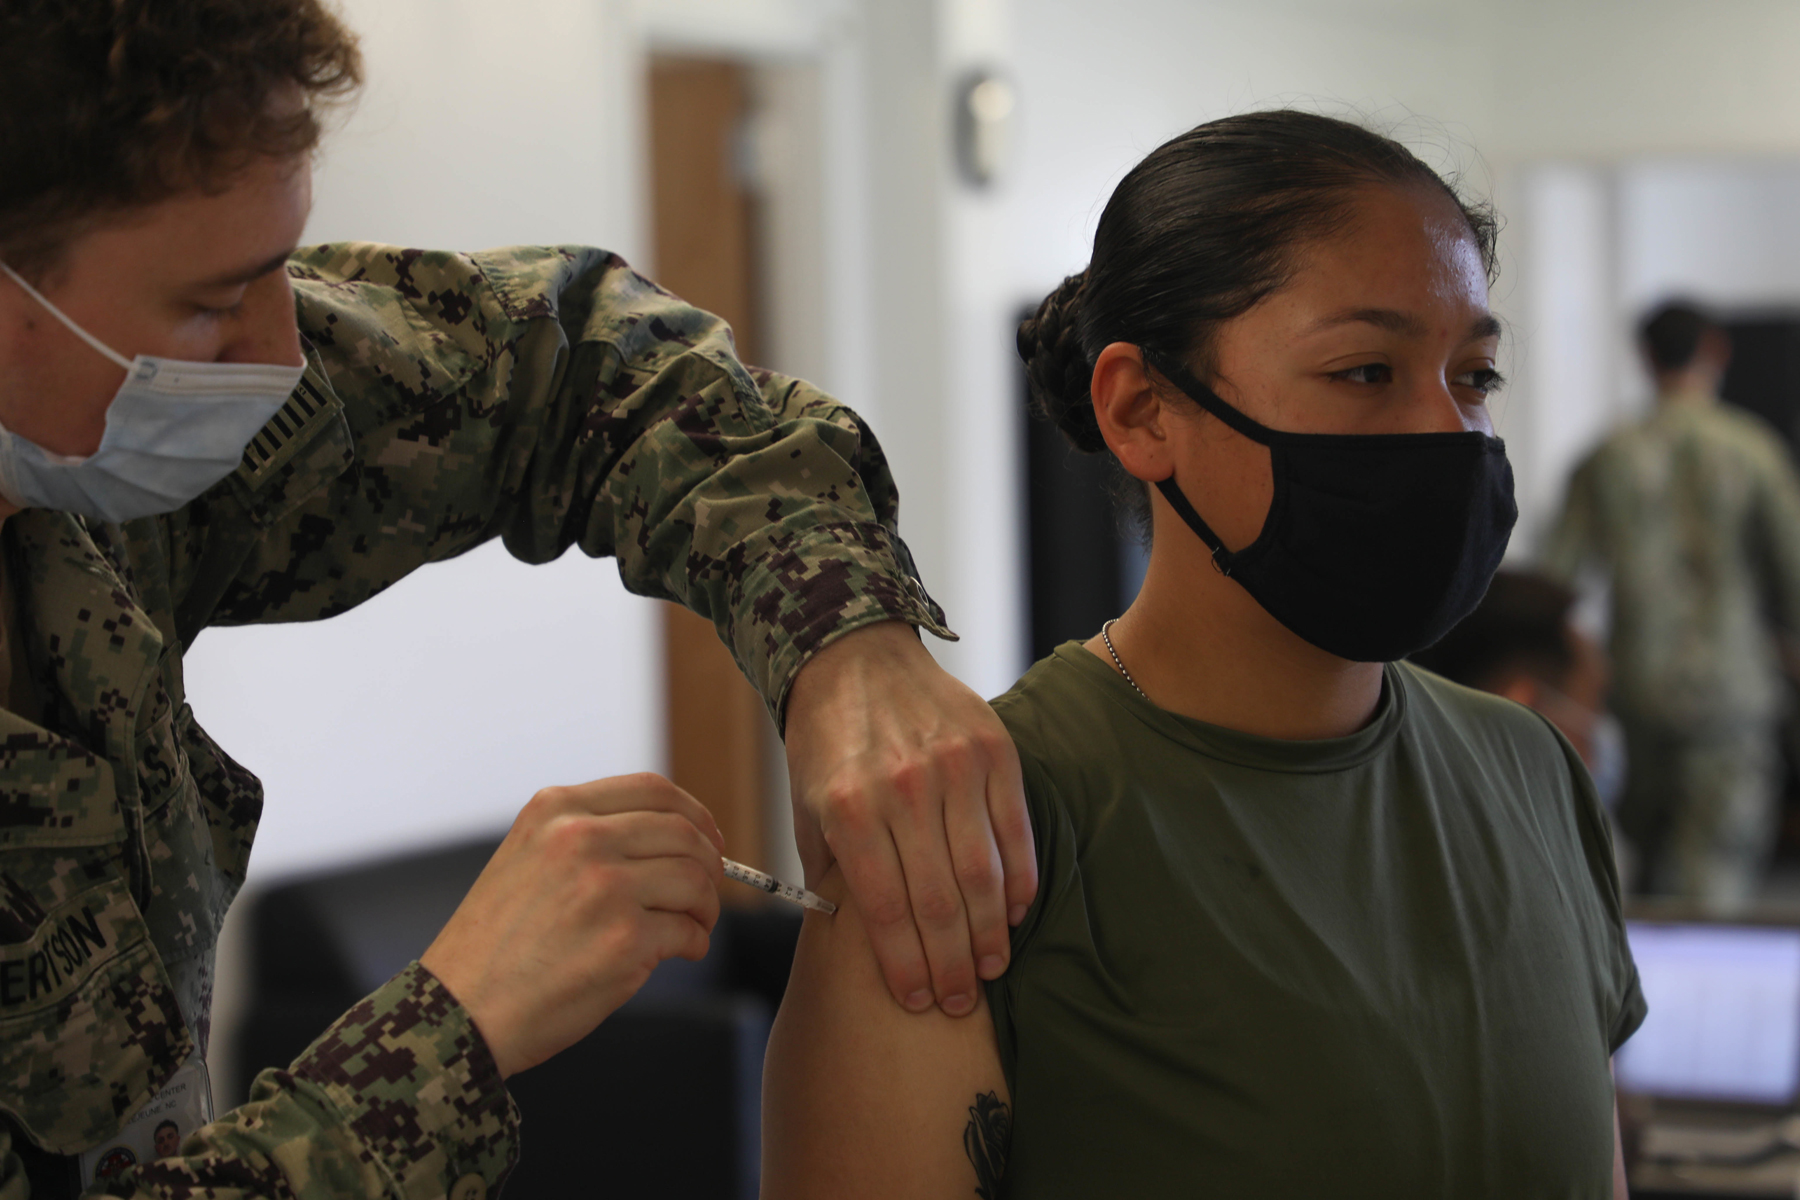 Marine Corps The Least Vaccinated Military Service, New Data Shows |  Military.com